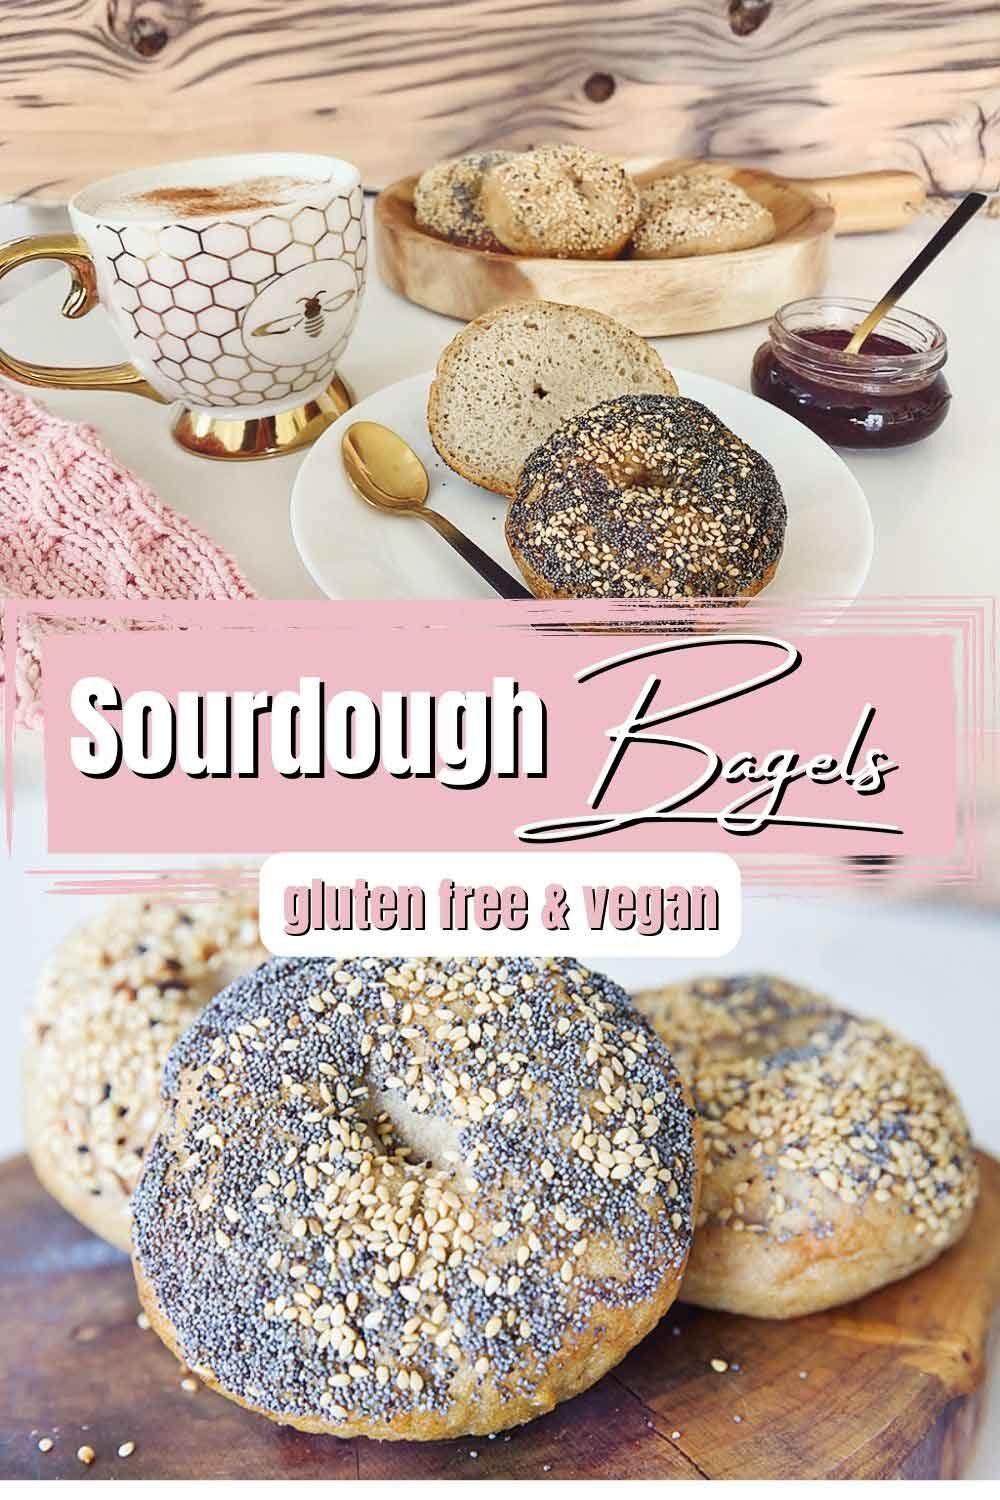 Enjoy these easy & delicious gluten free bagels with your Sunday morning latte! The best part is you absolutely can not tell they are gluten free. I promise! They are free from xanthan gum, guar gum & commercial yeast! These tasty bagels are traditional Canadian Montreal style, slightly sweeter (they are boiled in water sweetened with Canadian maple syrup or honey) and a little smaller smaller than New York style bagels. They are slightly crispy on the outside and chewy on the inside. These gluten free bakes are incredibly tasty with the perfect chewiness you've come to expect from a high quality bagel! If you're gluten free, dairy free, or vegan and miss eating bagels, you're going to love this recipe! Sourdough bagel recipe, gluten free sourdough bagels, gluten free vegan sourdough bagels, gluten free vegan, gluten free bagel recipe, gluten free bagels